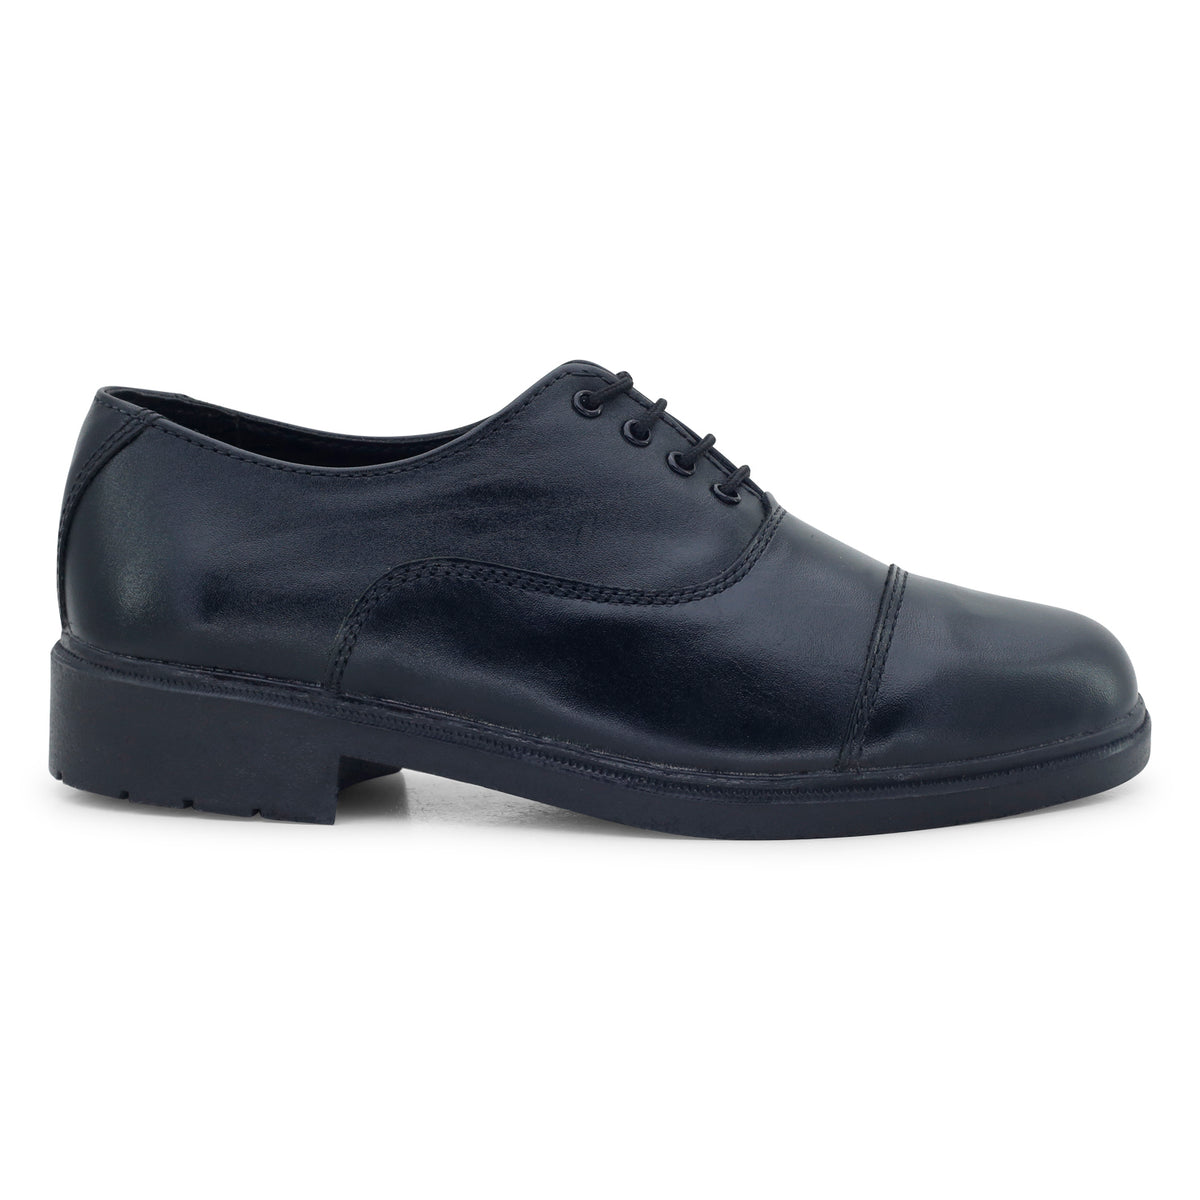 bata formal shoes with laces